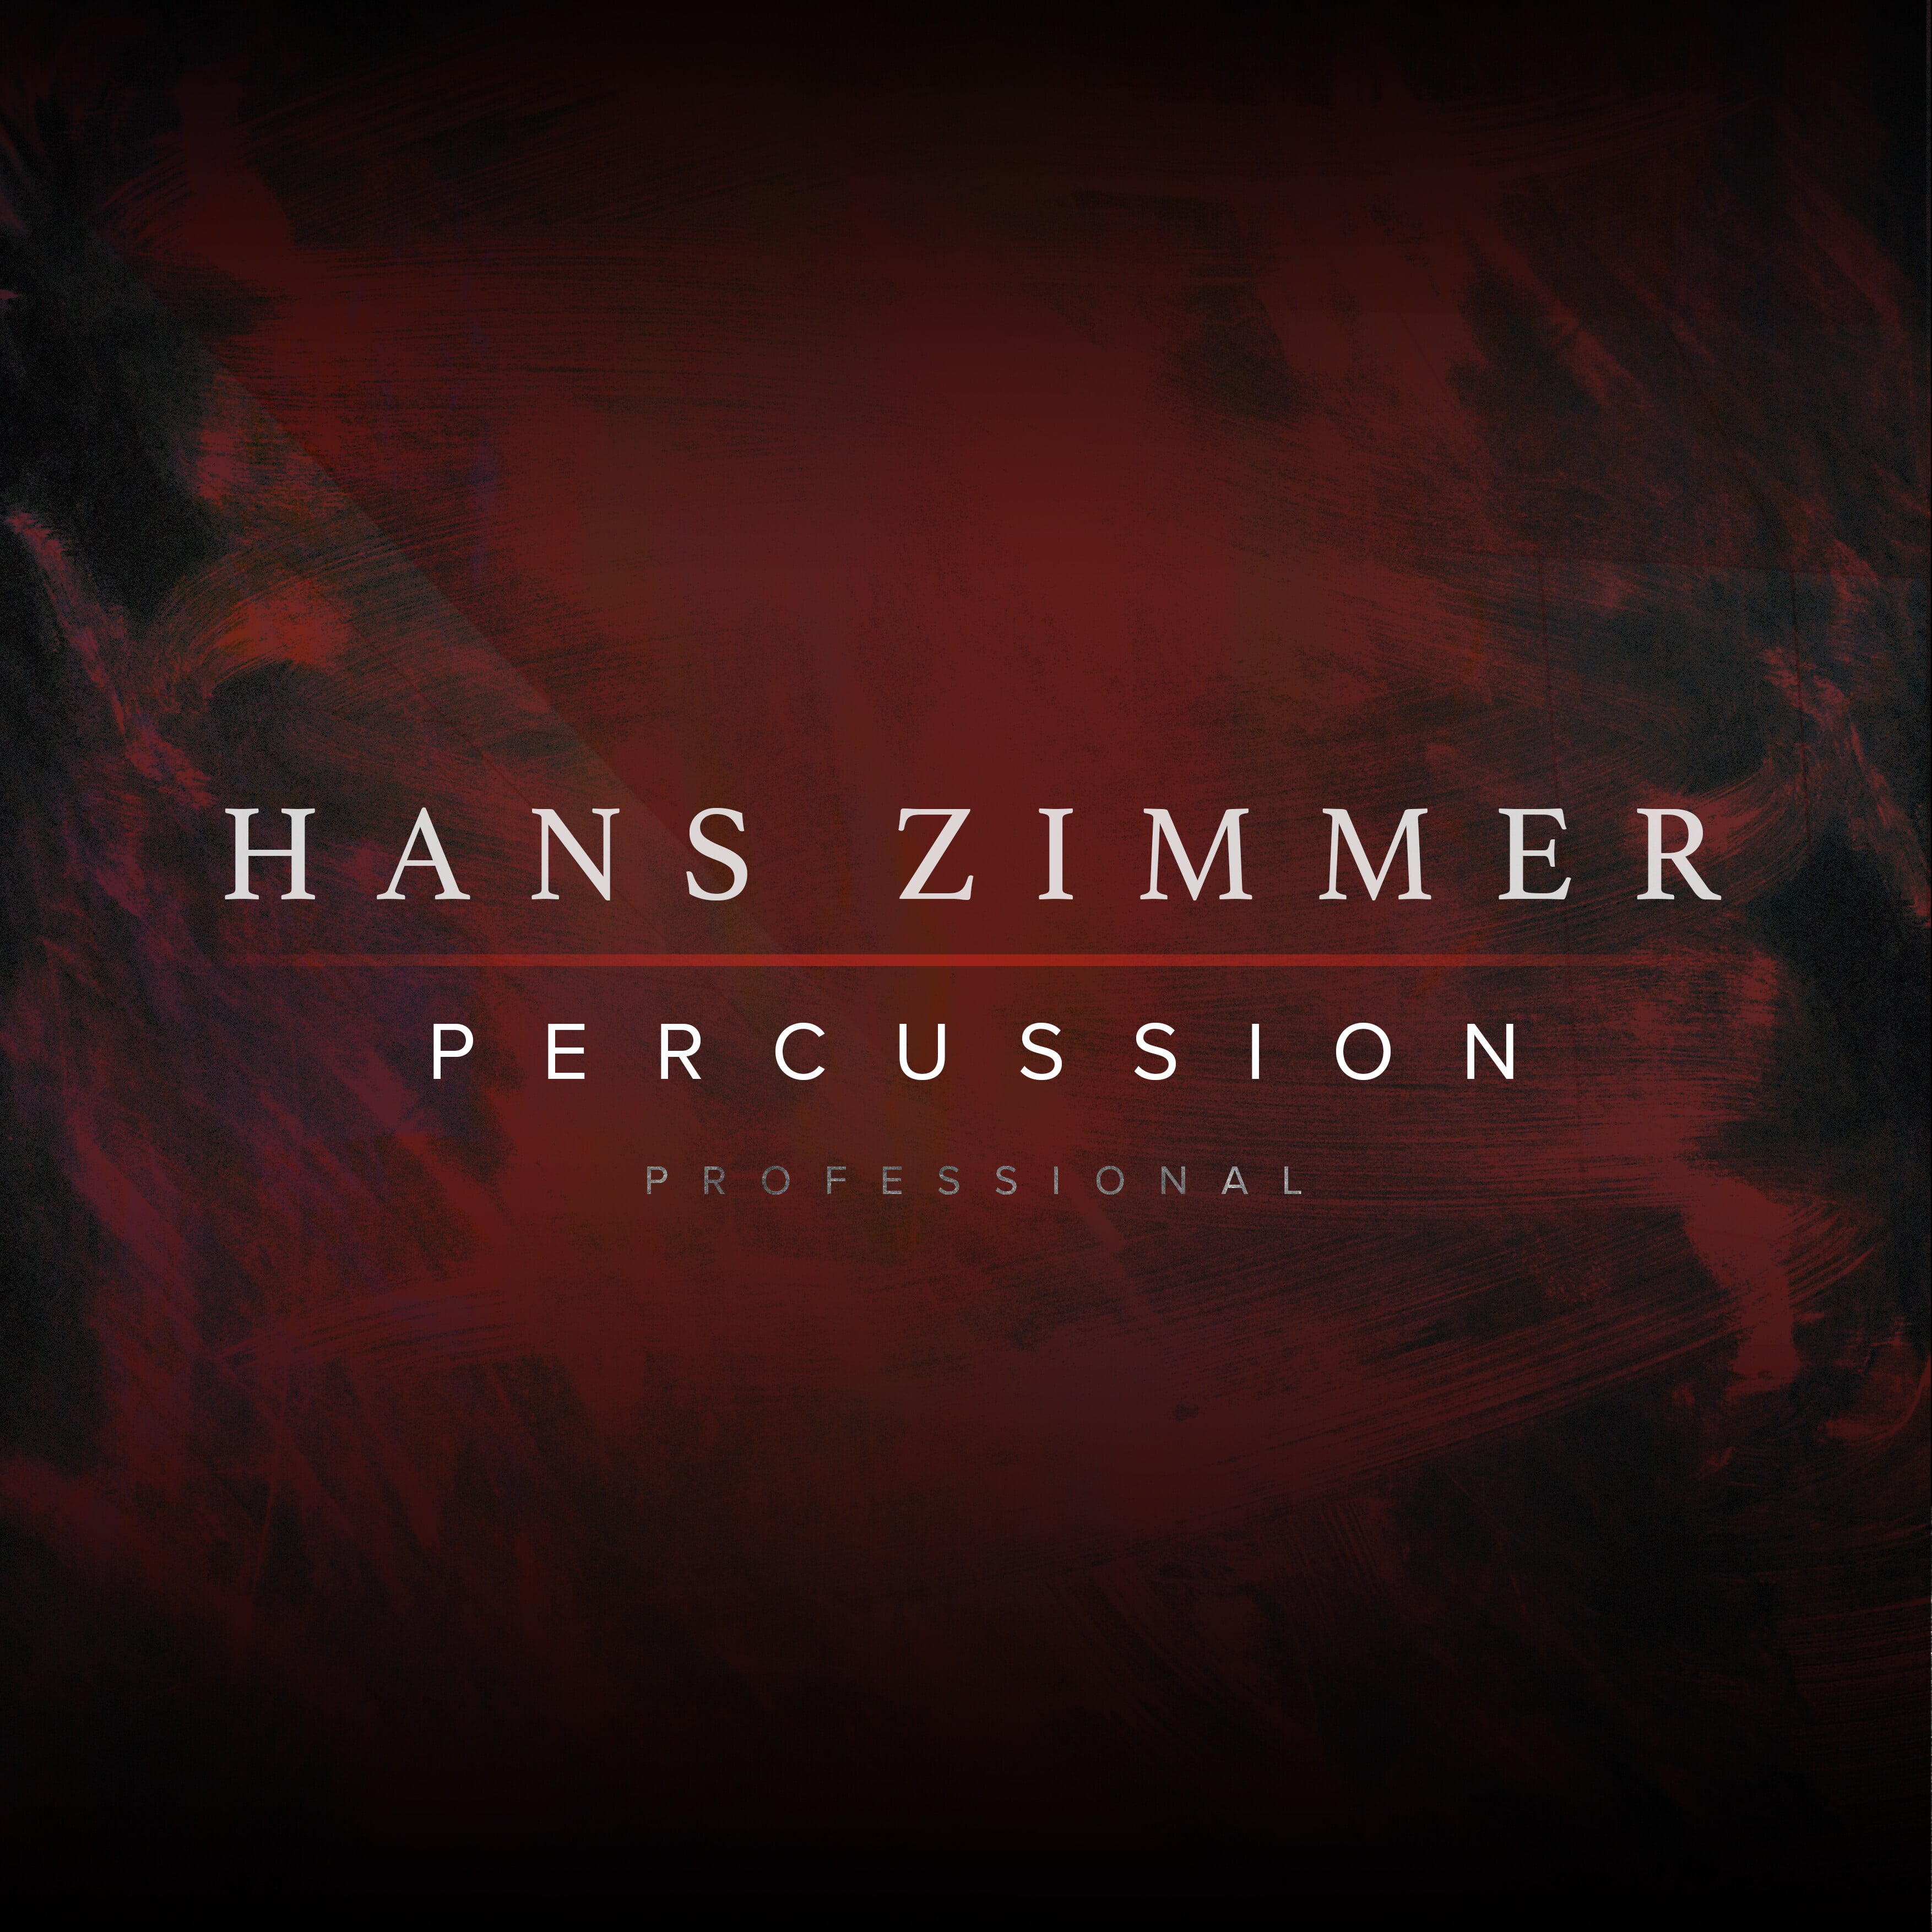 Hans Zimmer Percussion Professional